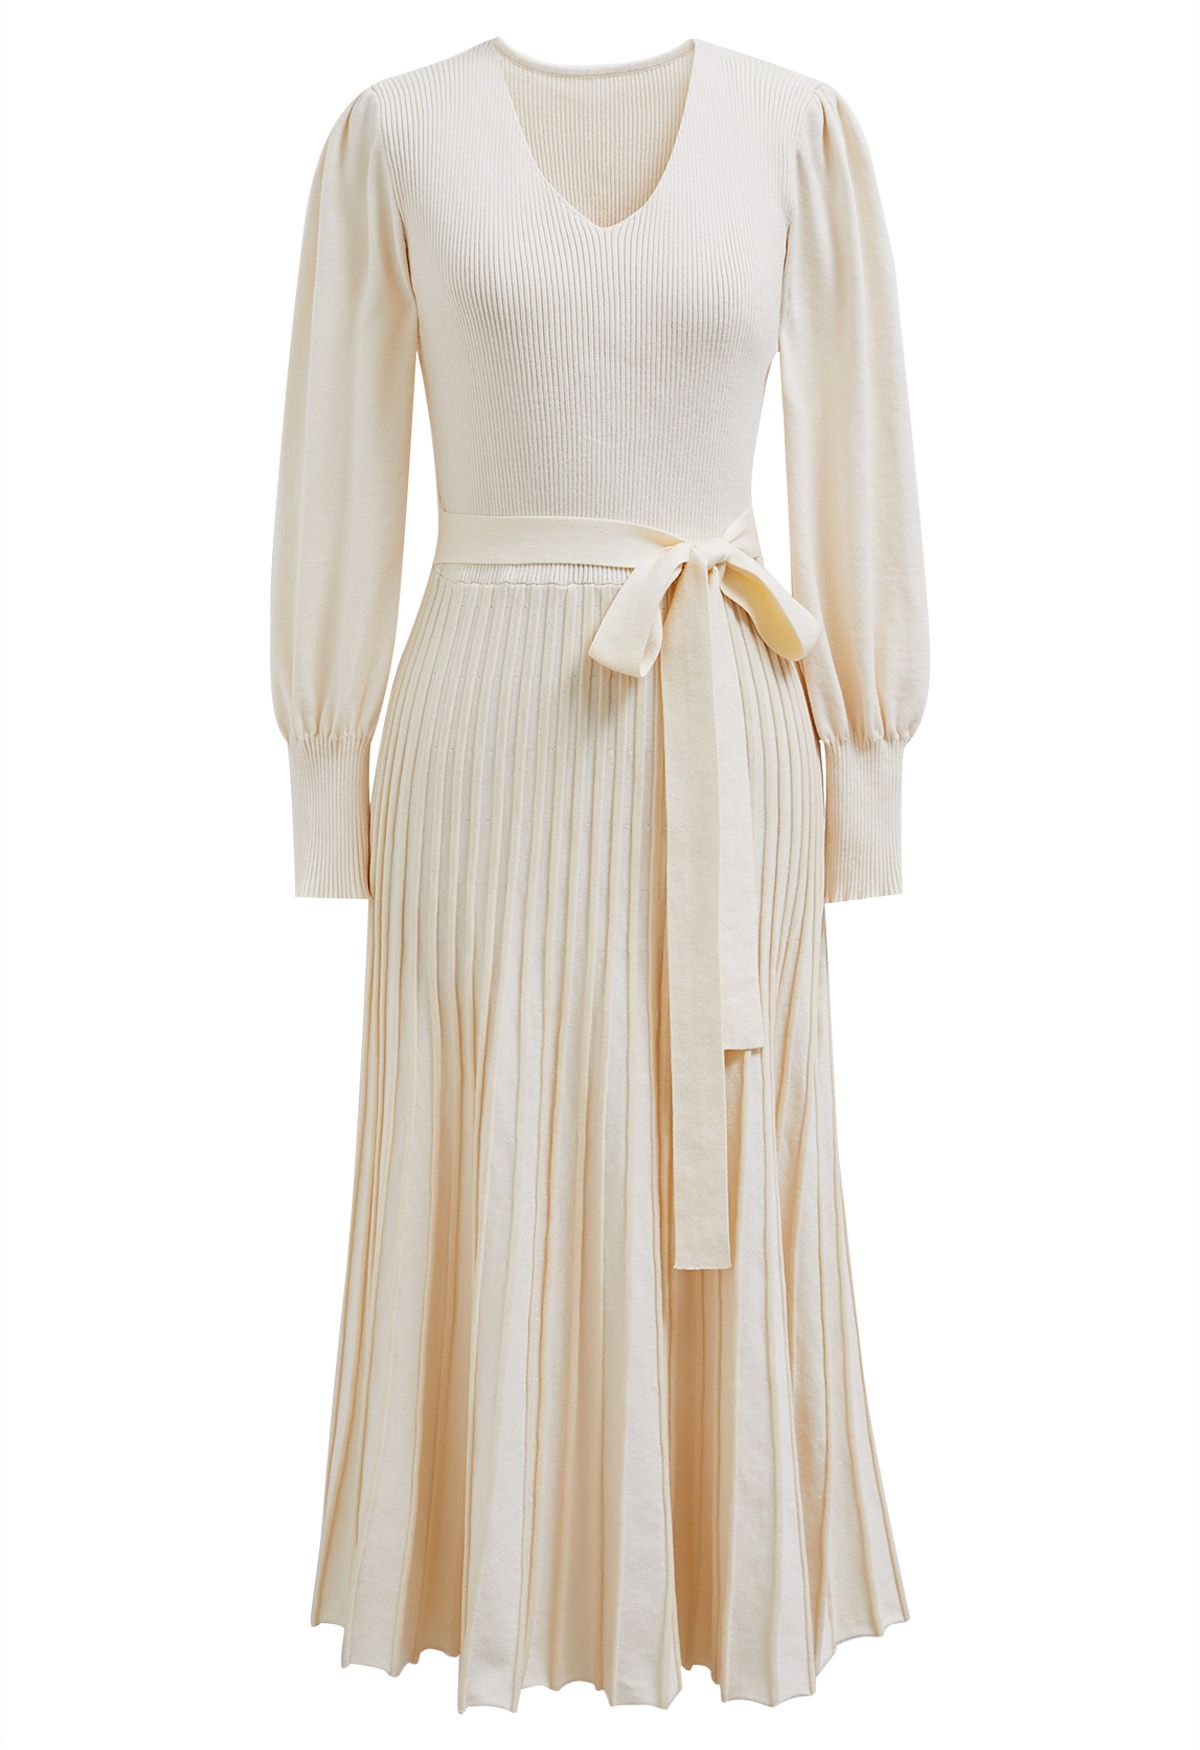 Captivating V-Neck Tie Waist Pleated Knit Dress in Cream - Retro, Indie ...